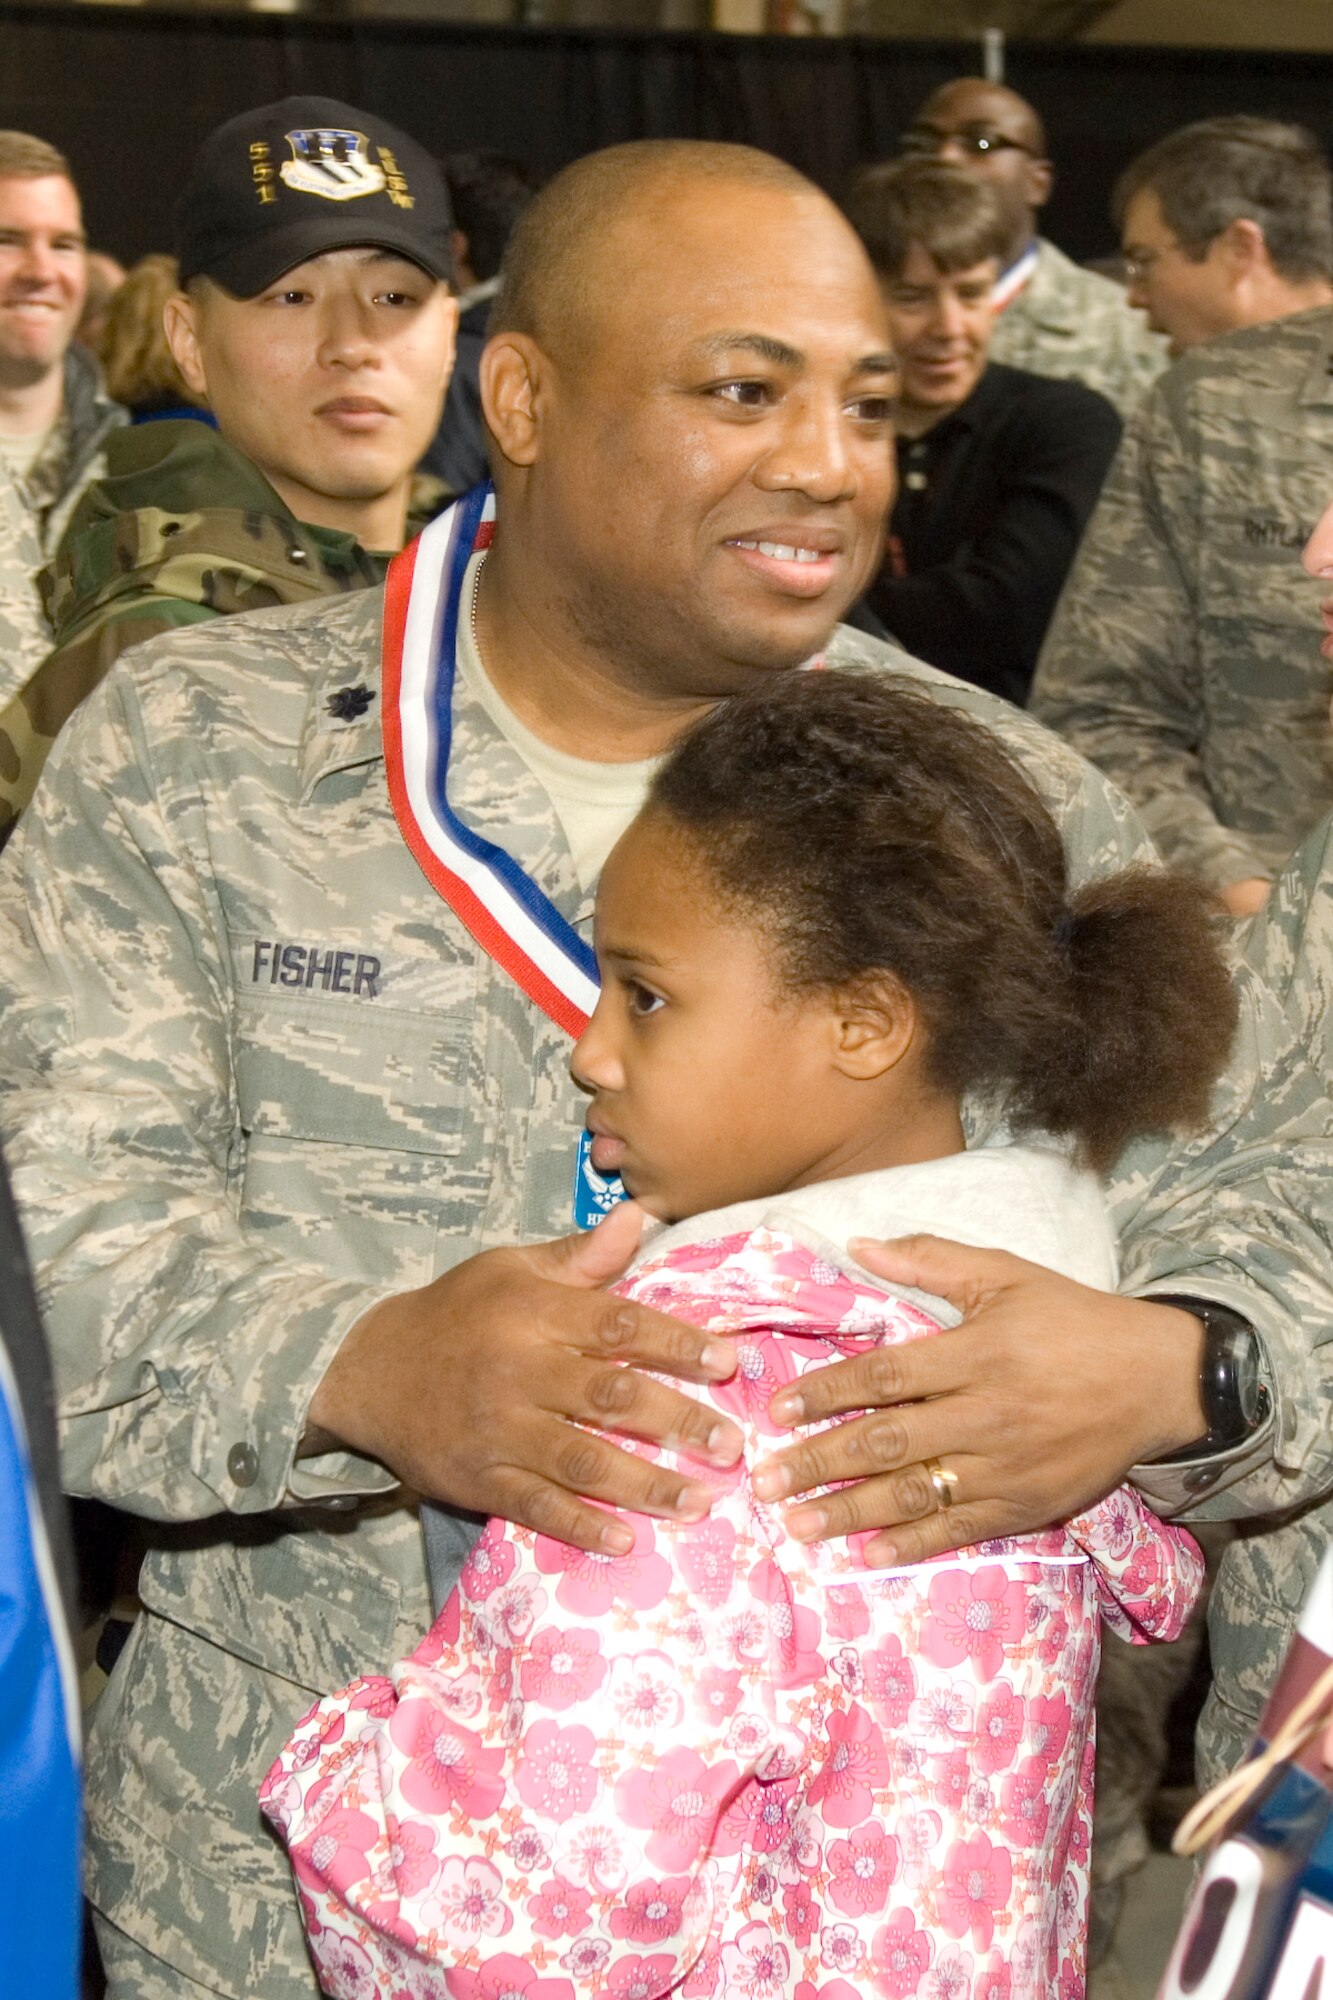 HANSCOM AIR FORCE BASE, Mass. – Lt. Col. Tyron Fisher, 632nd Electronic Systems Squadron commander, hugs his daughter Tyra, during the Heroes’ Homecoming celebration that took place Dec. 12. The event officially welcomed home all of Hanscom’s Airmen that have served on deployments over the past six months. Colonel Fisher returned from his deployment to Iraq just an hour before the start of the ceremony. (U.S. Air Force photo by Rick Berry)